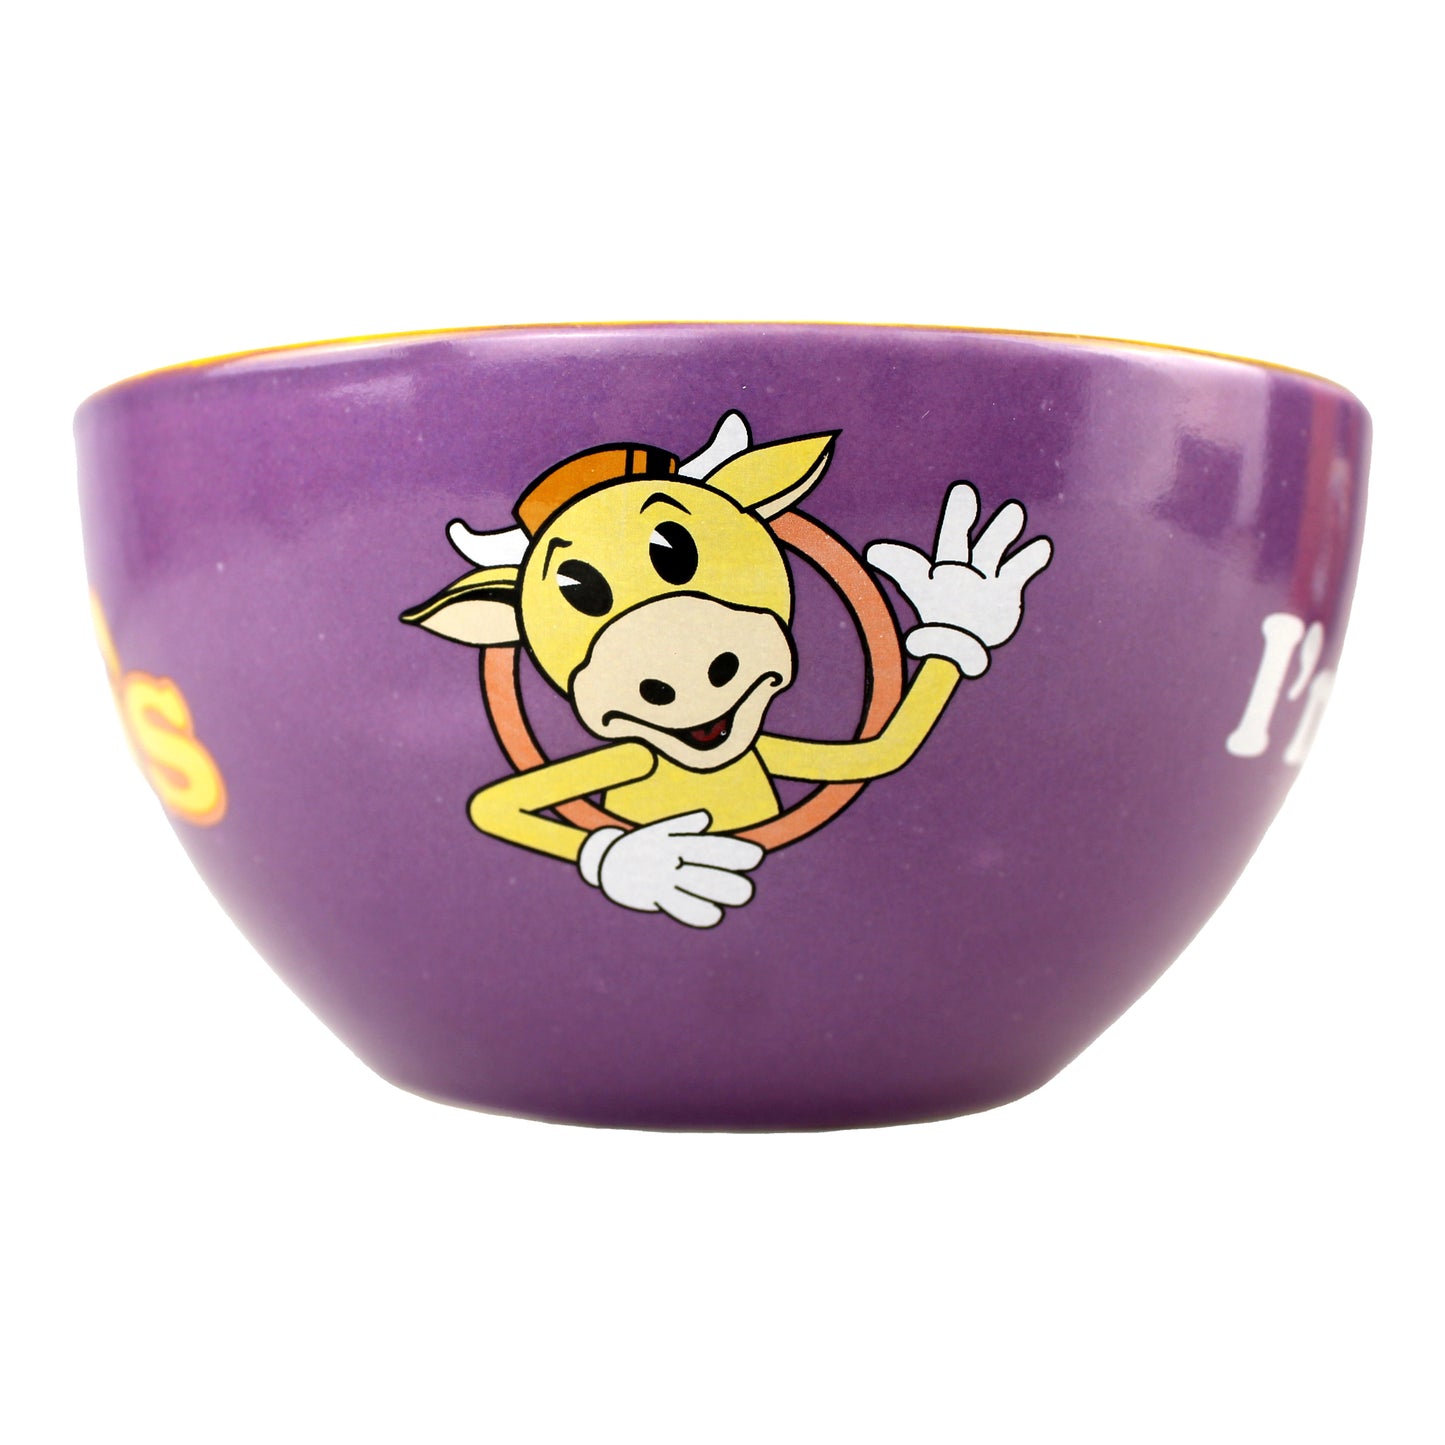 Jay & Silent Bob Mooby's Cereal Bowl